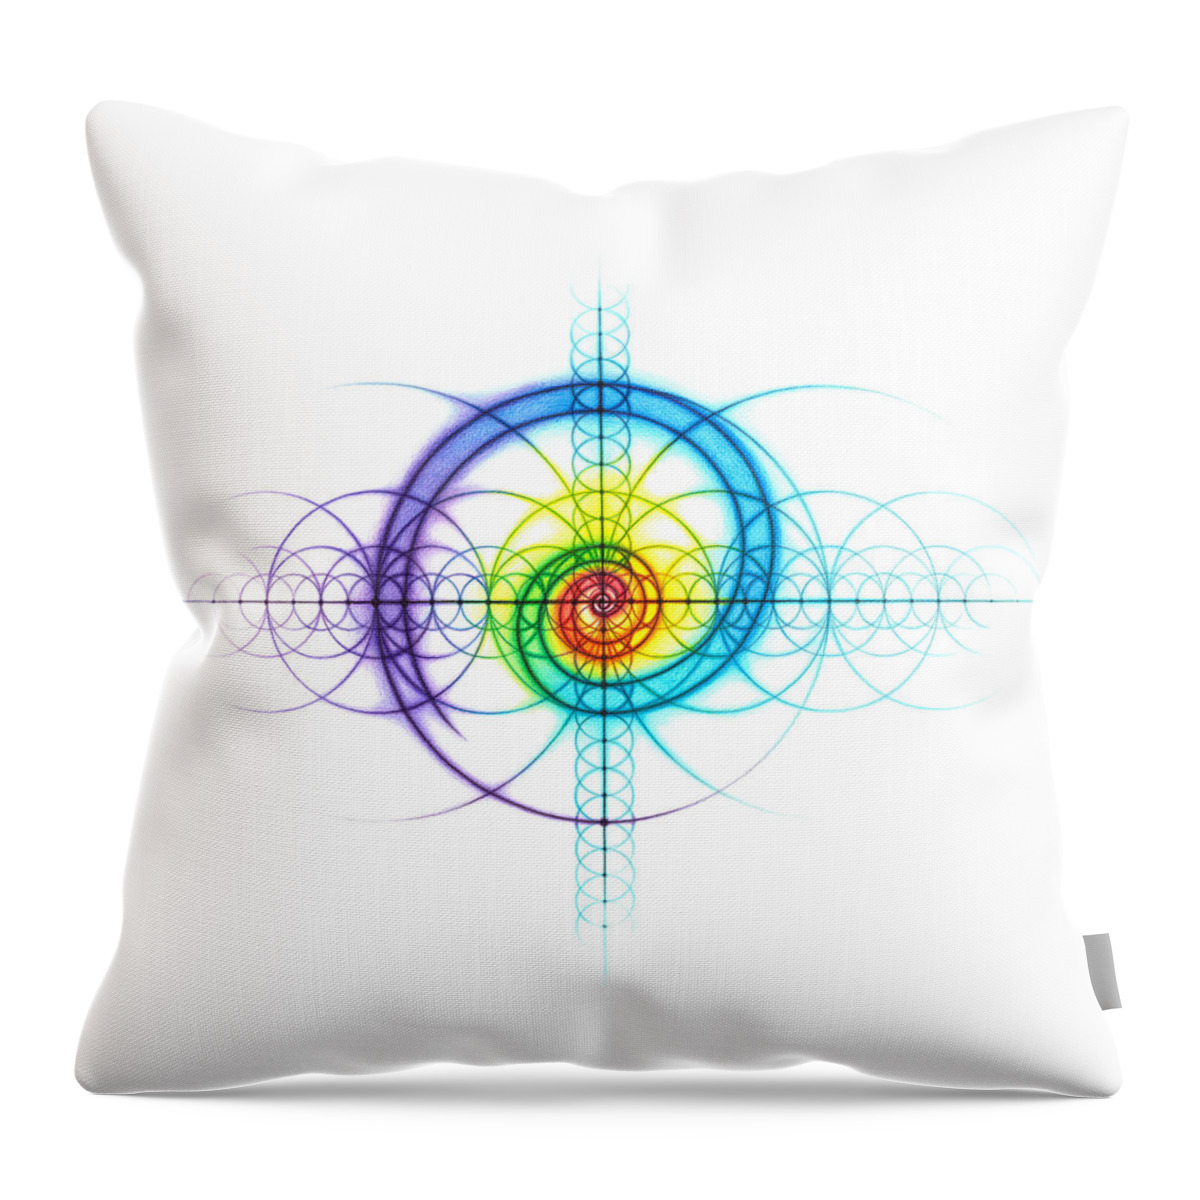 Spiral Throw Pillow featuring the drawing Intuitive Geometry Spectrum Spiral by Nathalie Strassburg